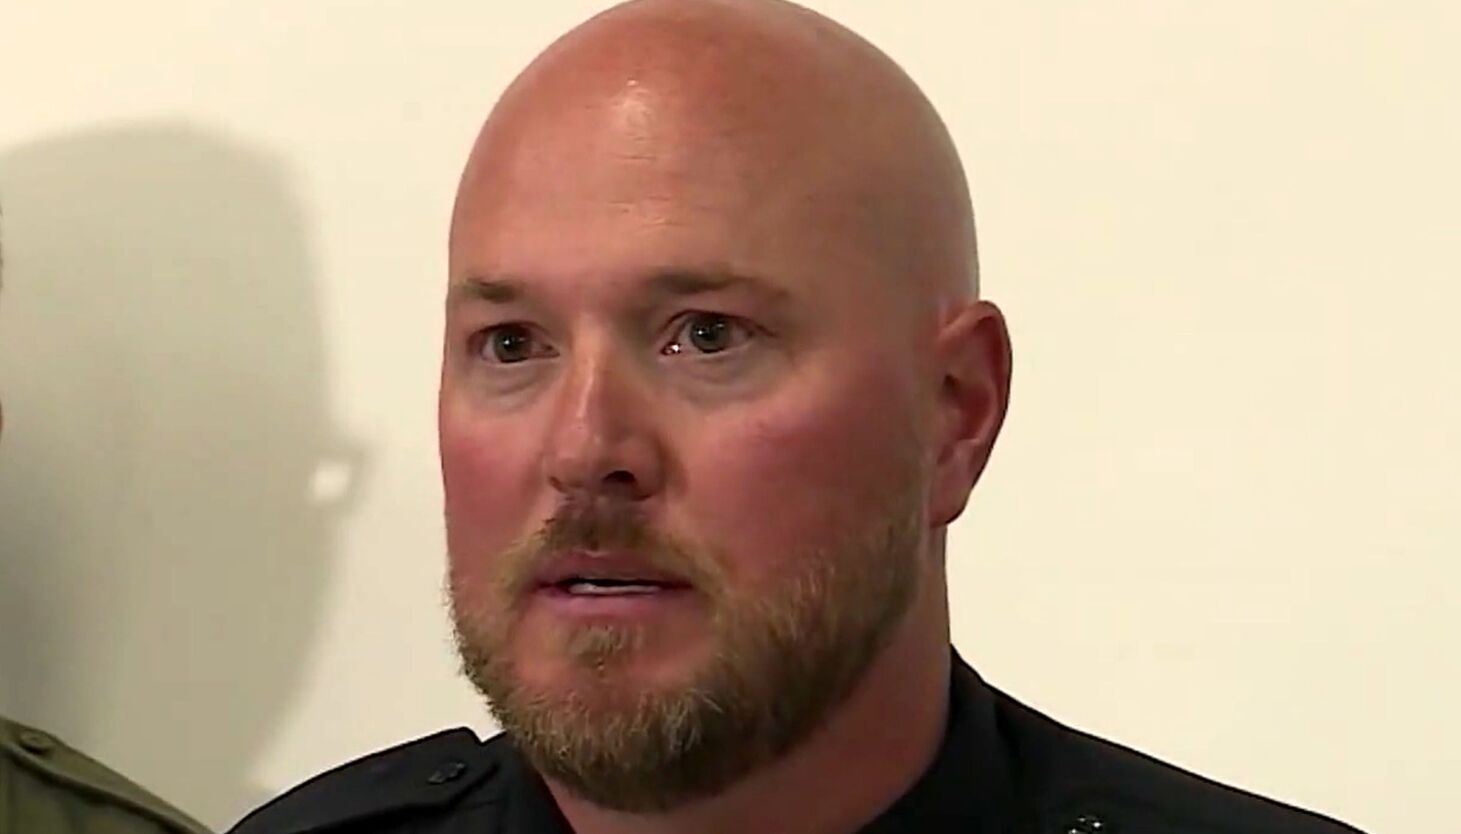   
																Former Utah police chief charged with misusing public funds 
															 